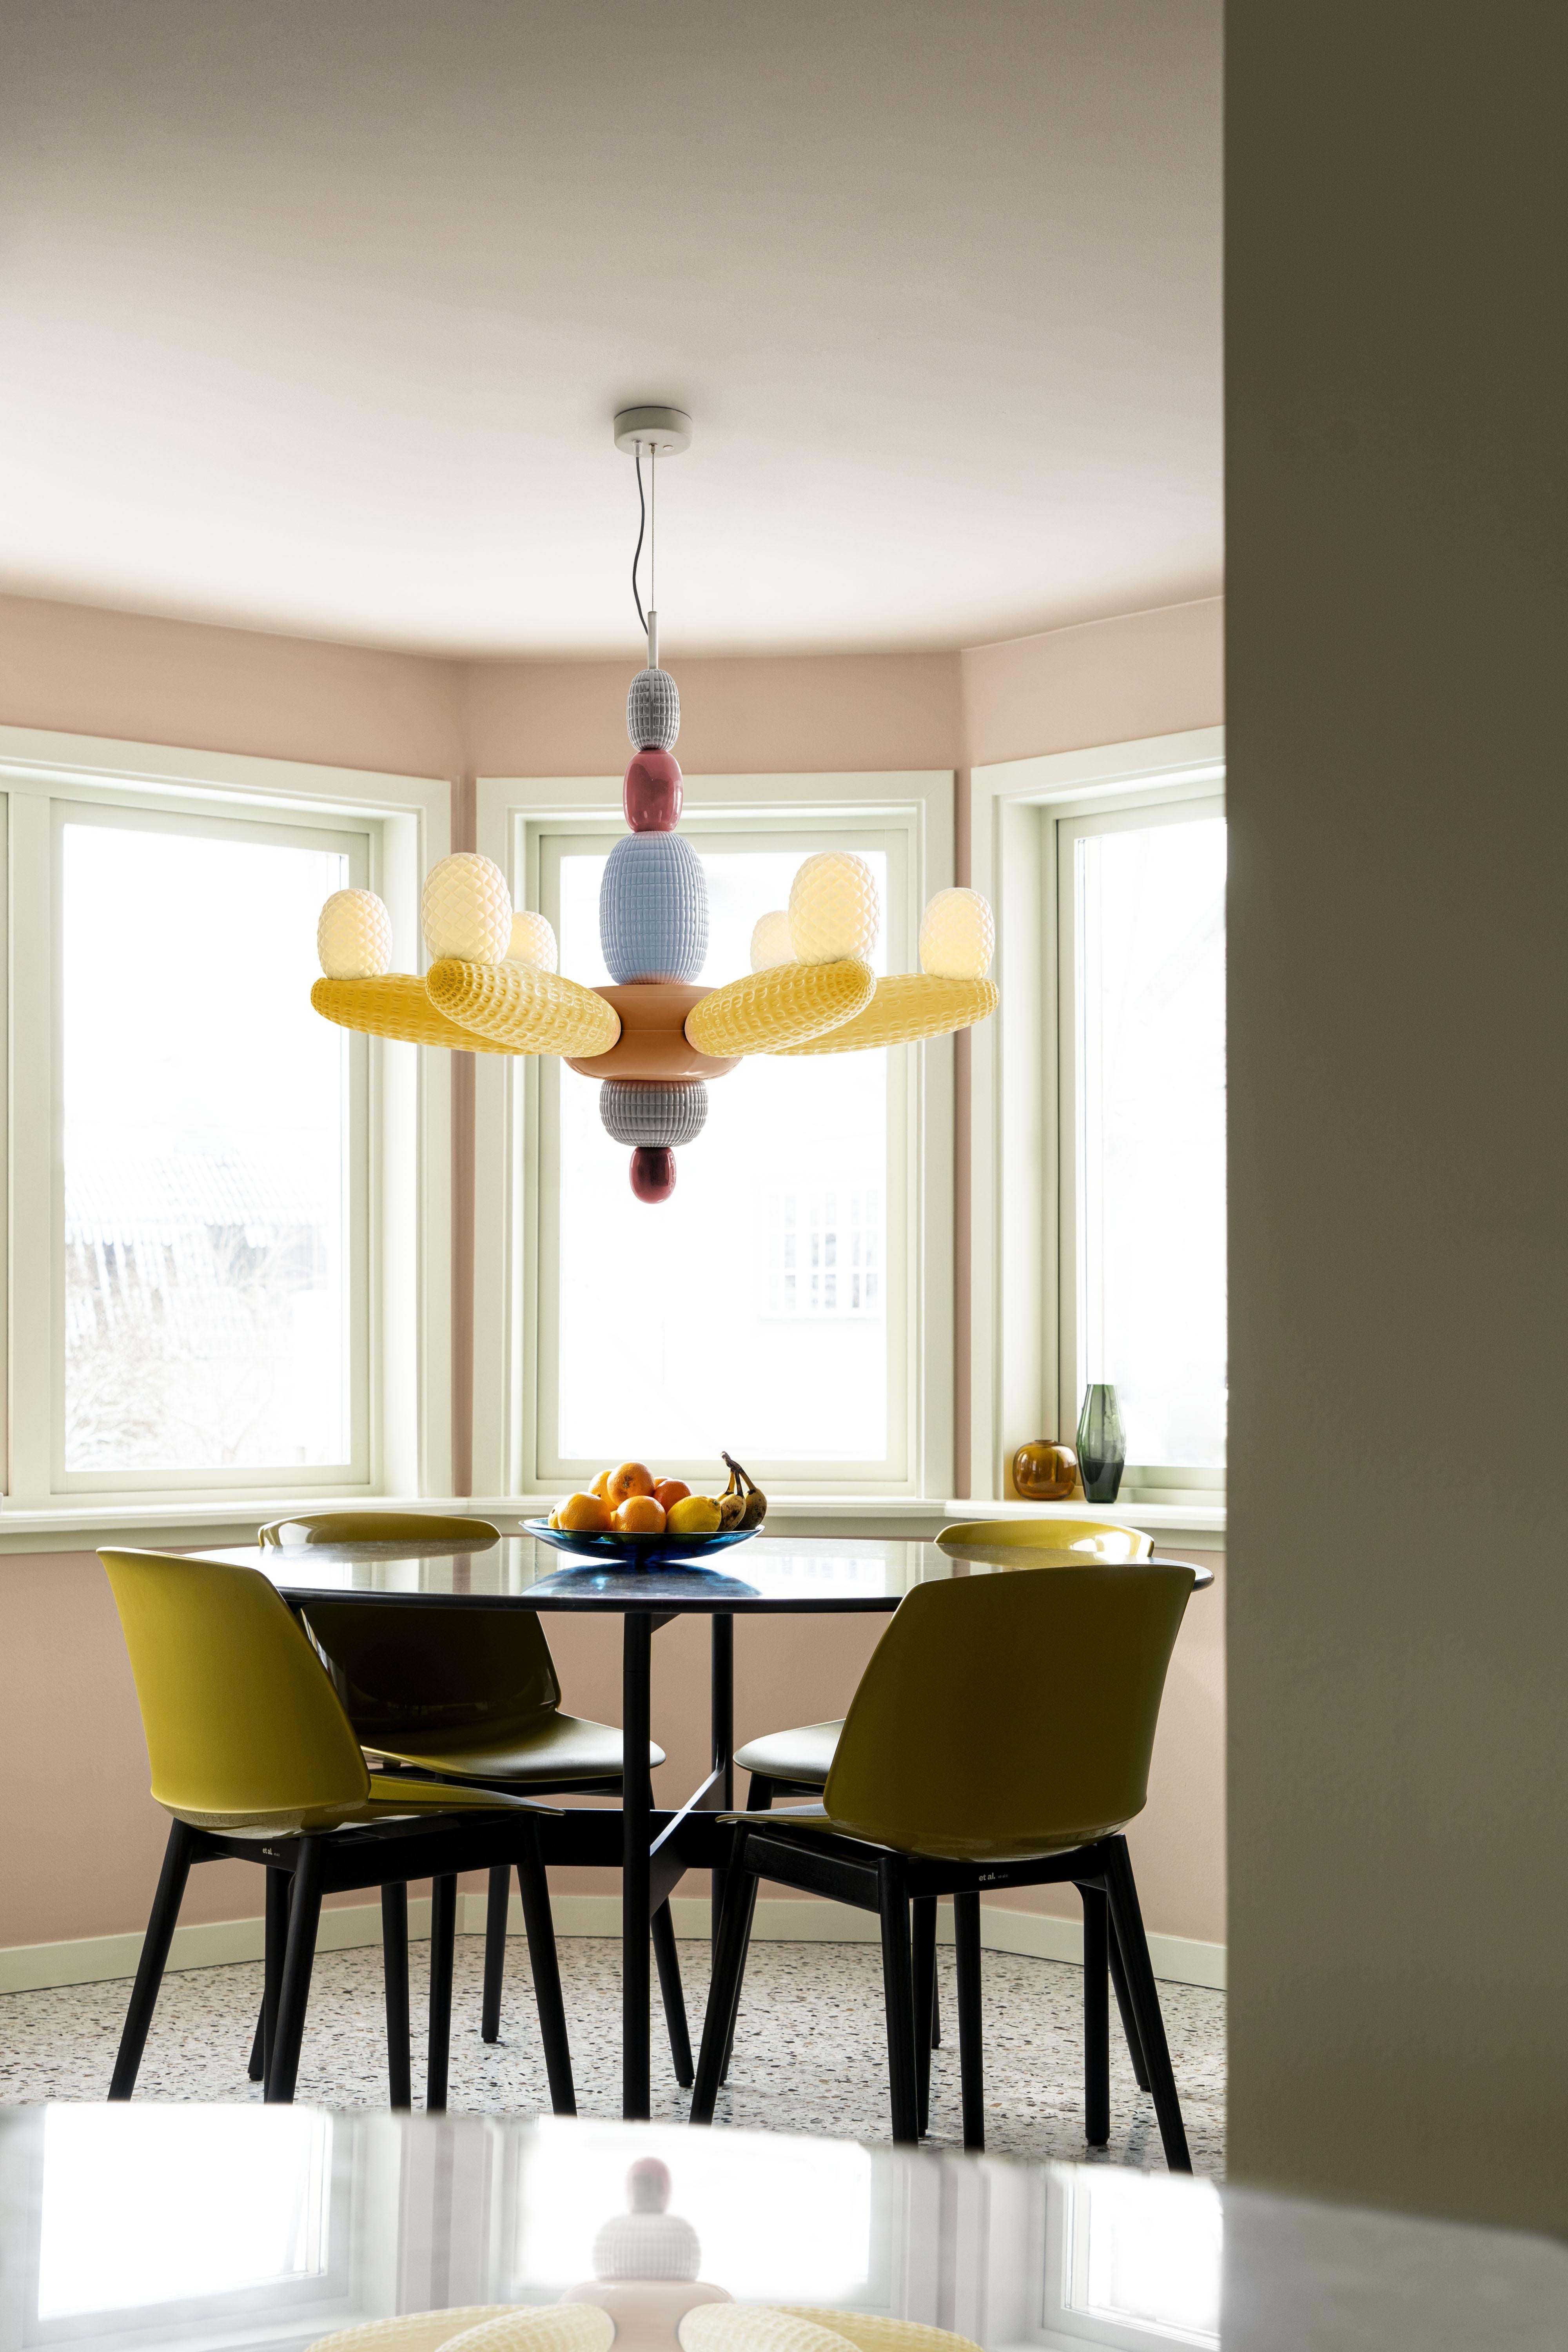 Porcelain chandelier from the Soft Blown collection, designed for Lladró by Luca Nichetto. This porcelain chandelier from the Soft Blown collection is one of the first designs made for Lladró by Nichetto Studio, the prestigious Stockholm-based